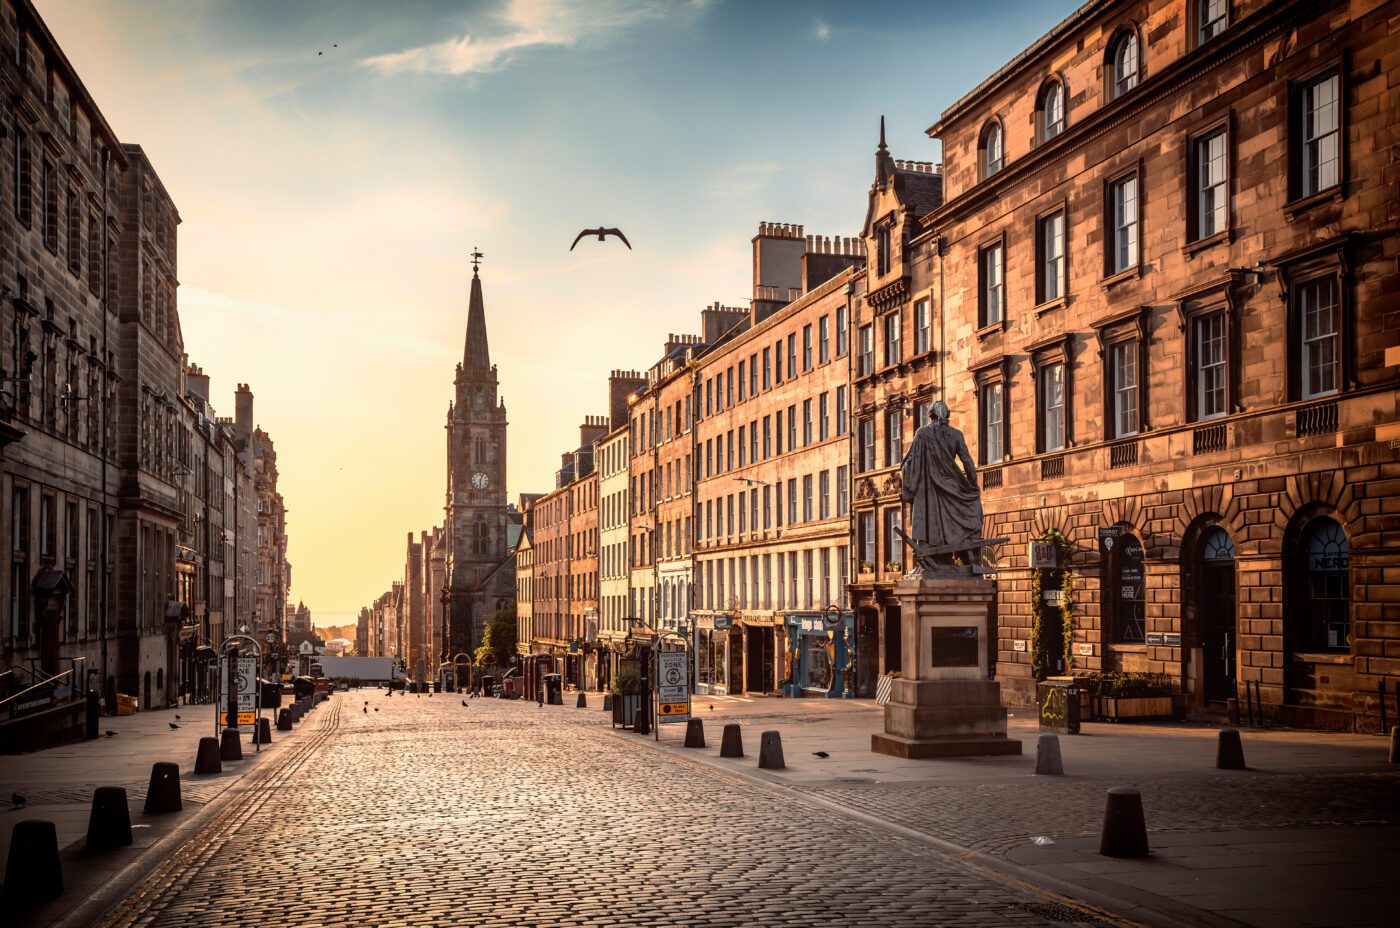 The view of the Royal Mile and the Adam Smith Statue in the sunrise hours